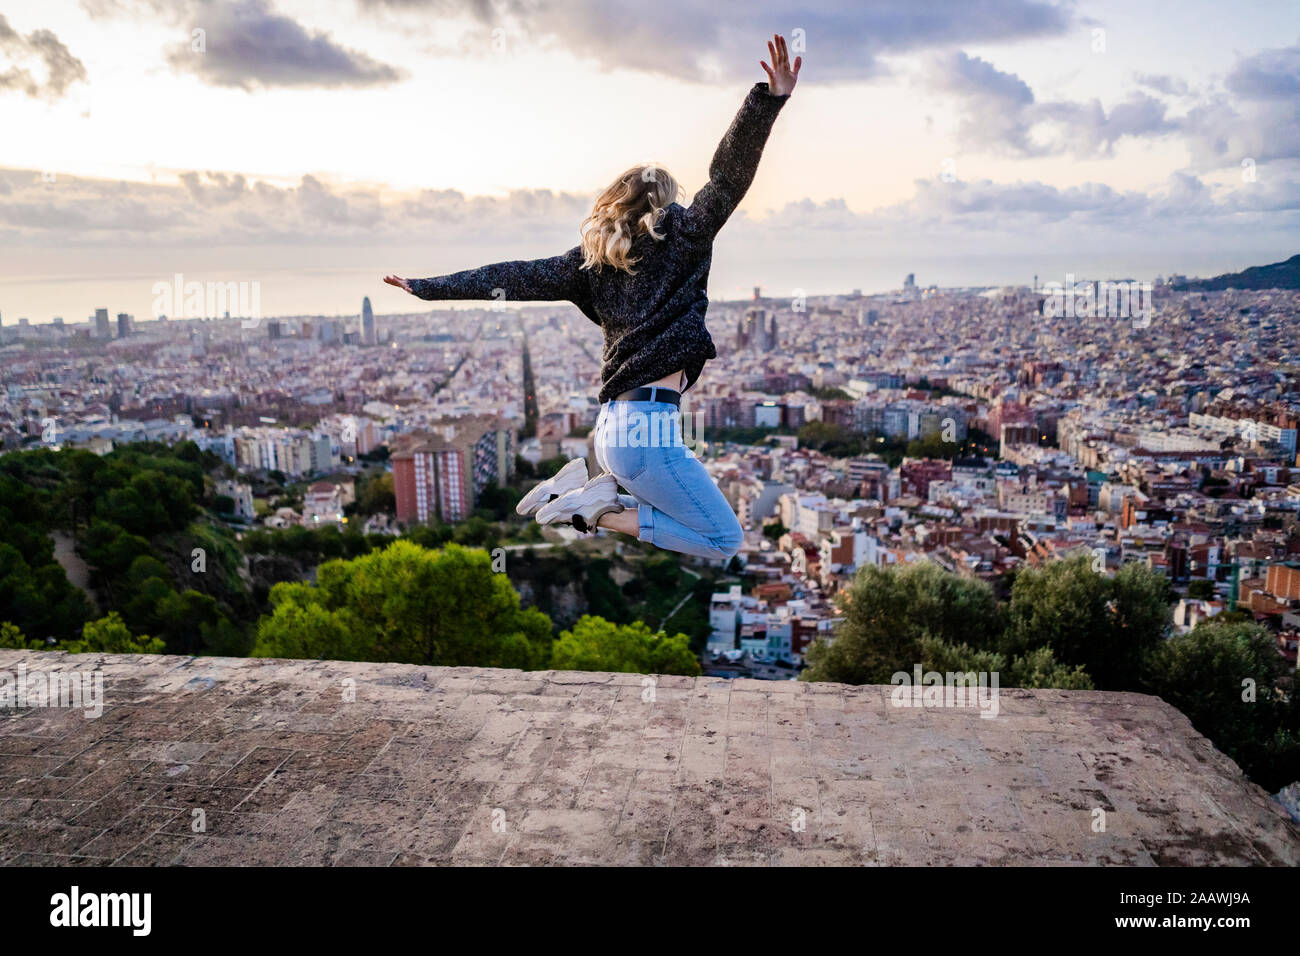 Carefree young woman jumping above the city at sunrise, Barcelona, Spain Stock Photo